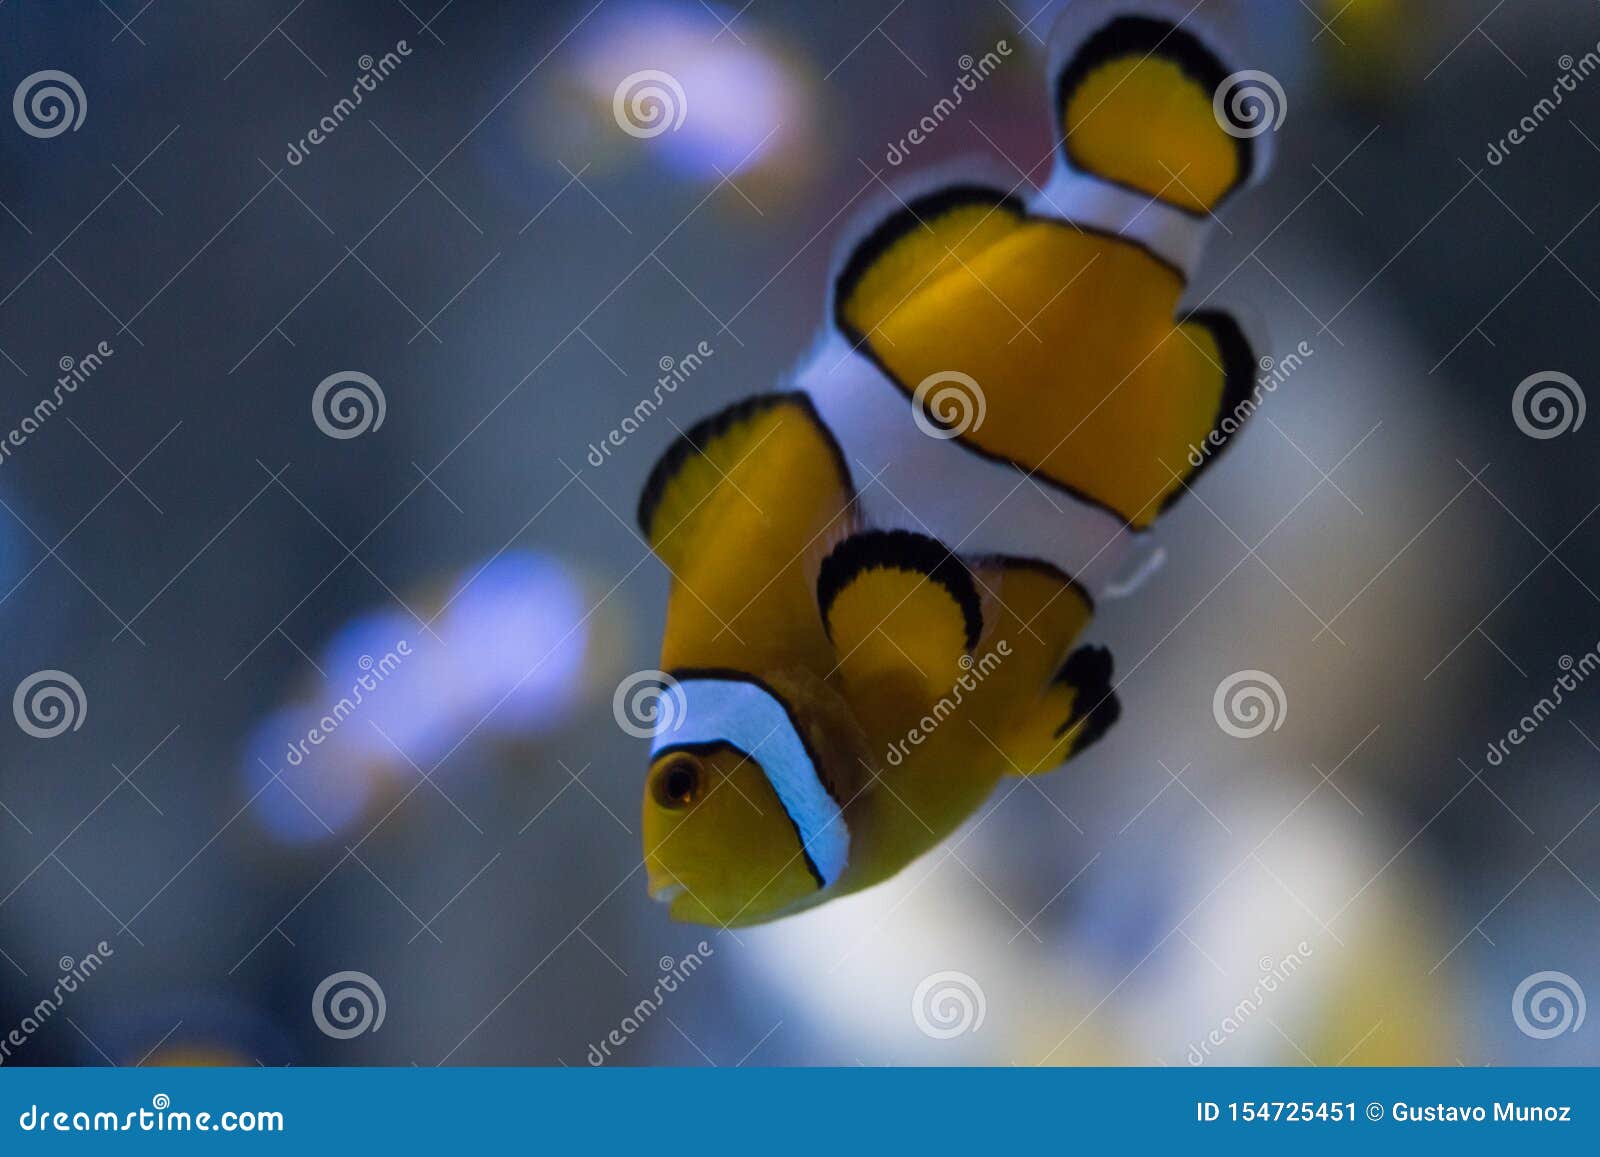 the clownfish amphiprioninae also called anemonefish, next to an sea anemone